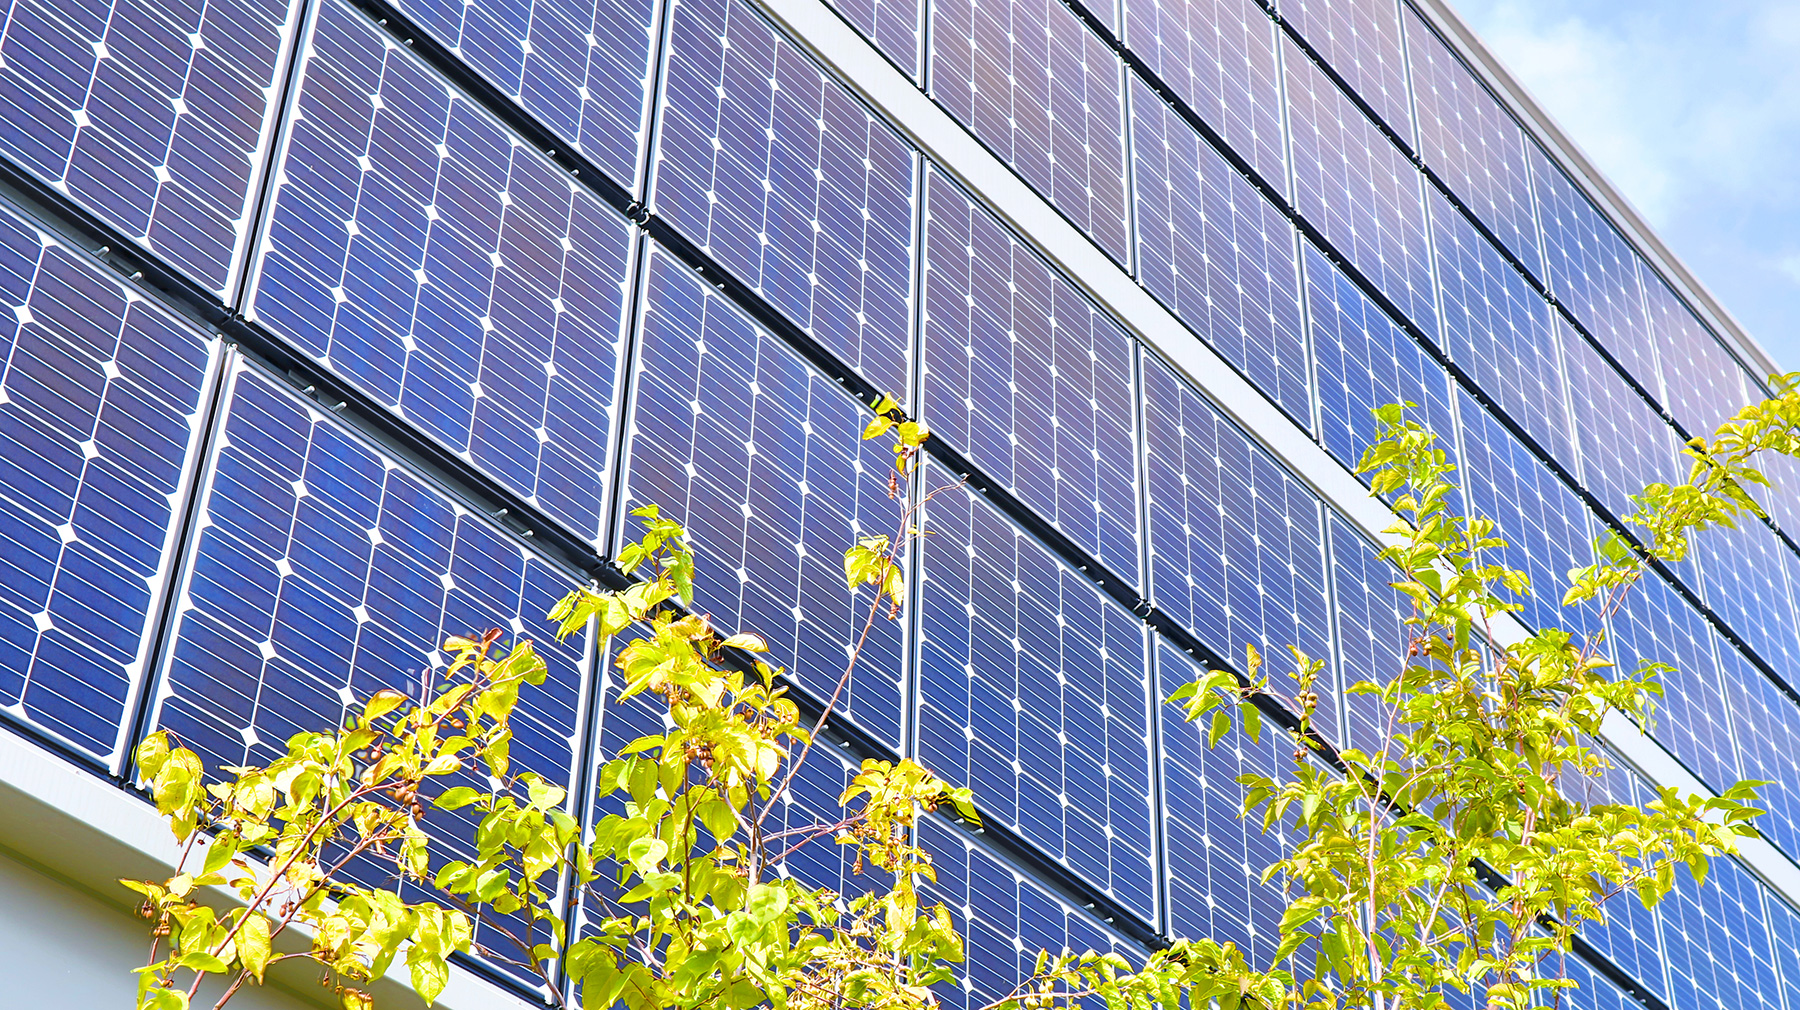 Top 5 Major Corporations that are Making BIG investments in Solar Energy in 2020 